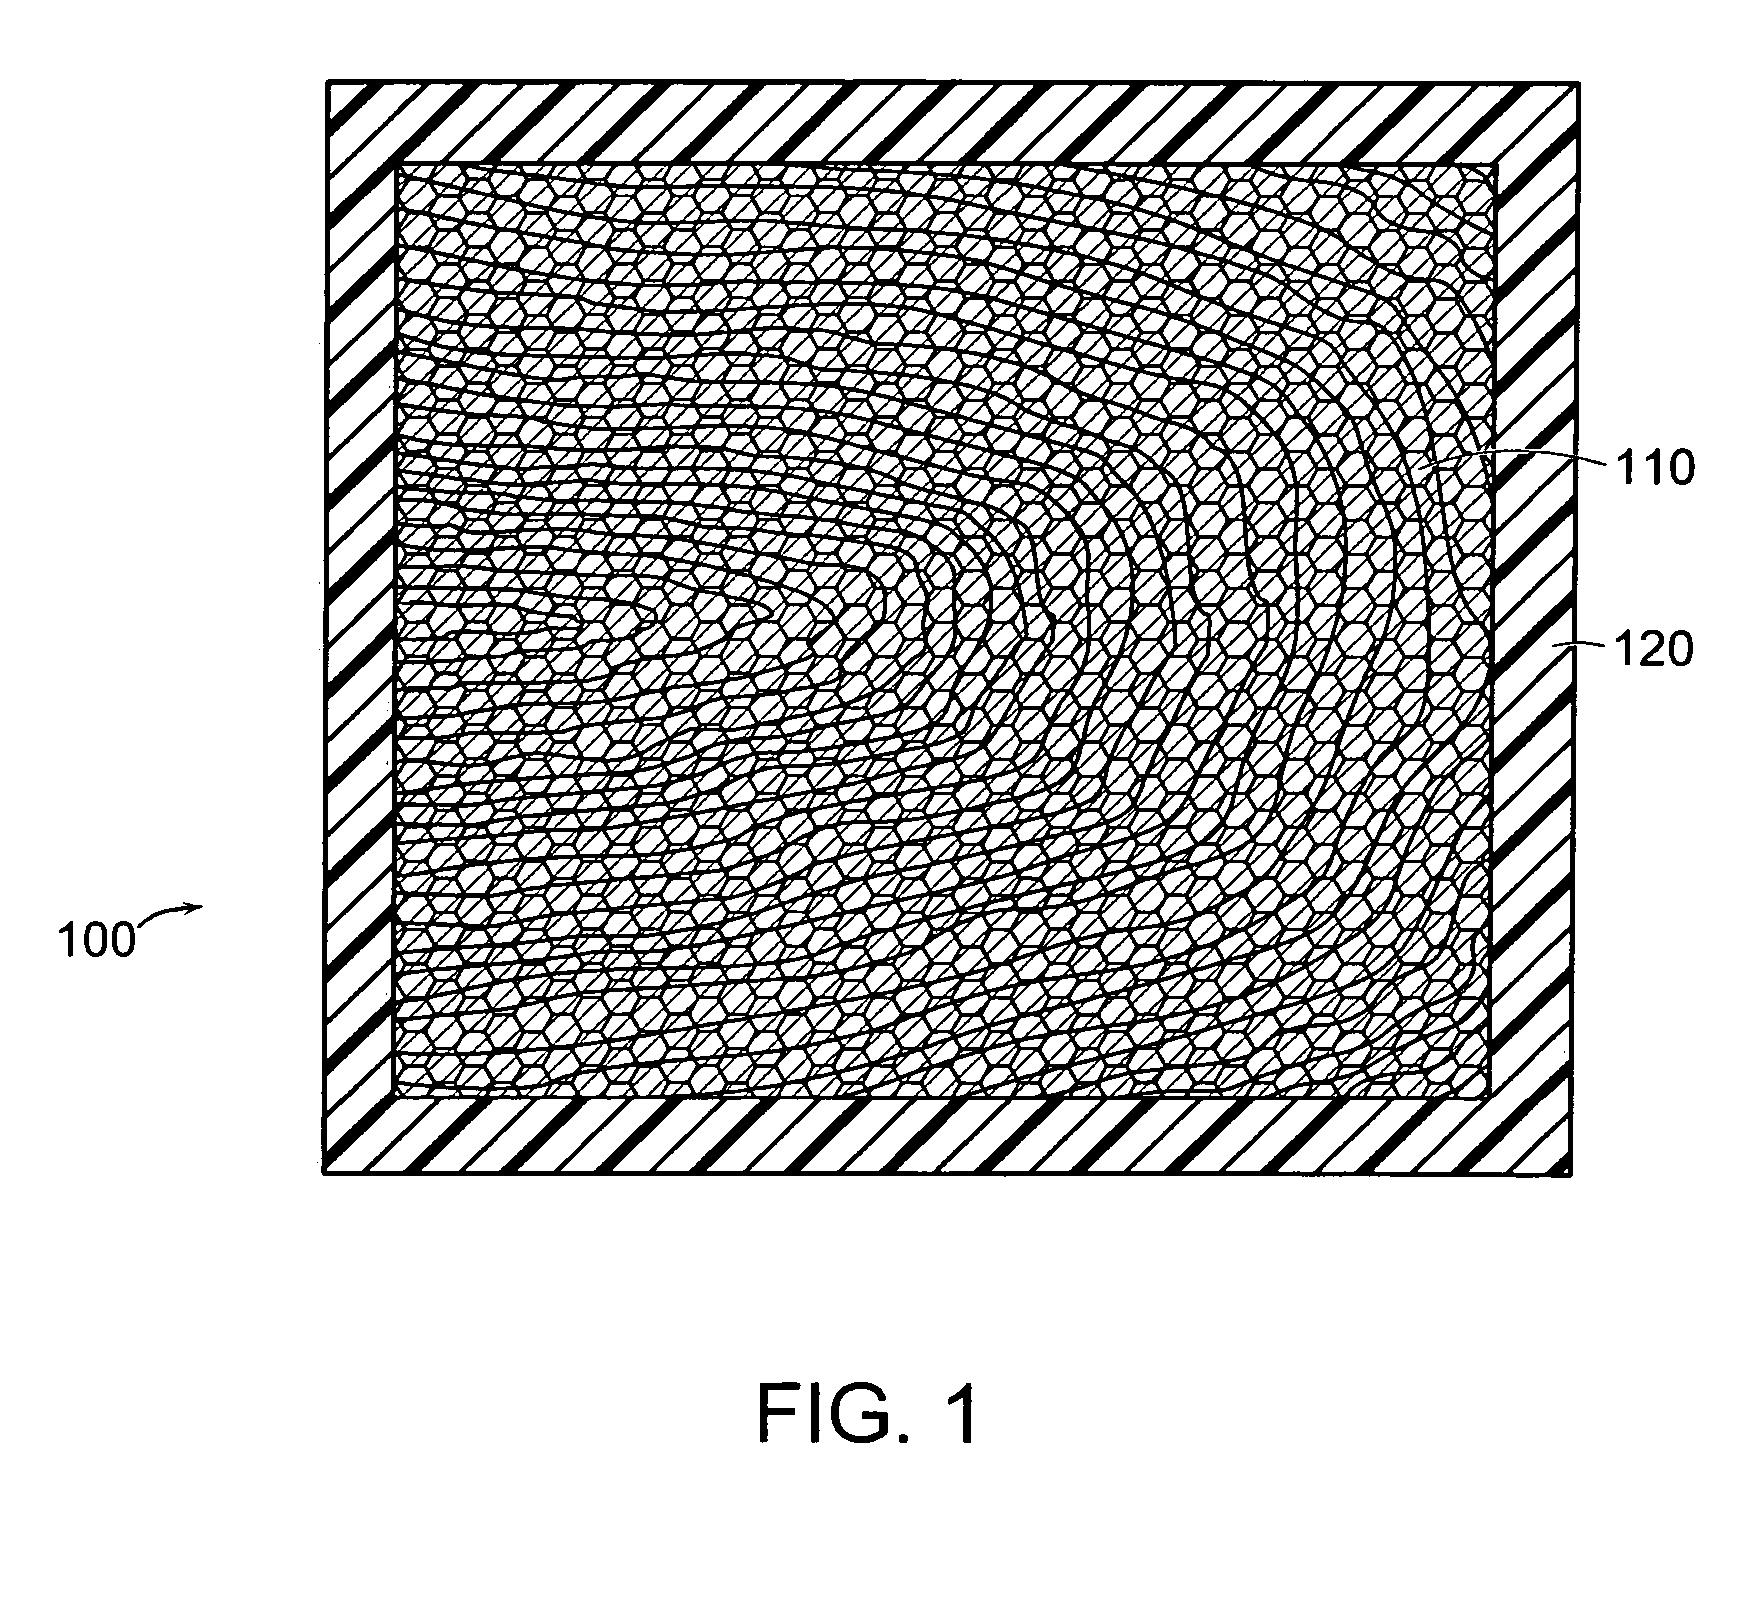 Composite coated/encapsulated wood products and methods to produce the same